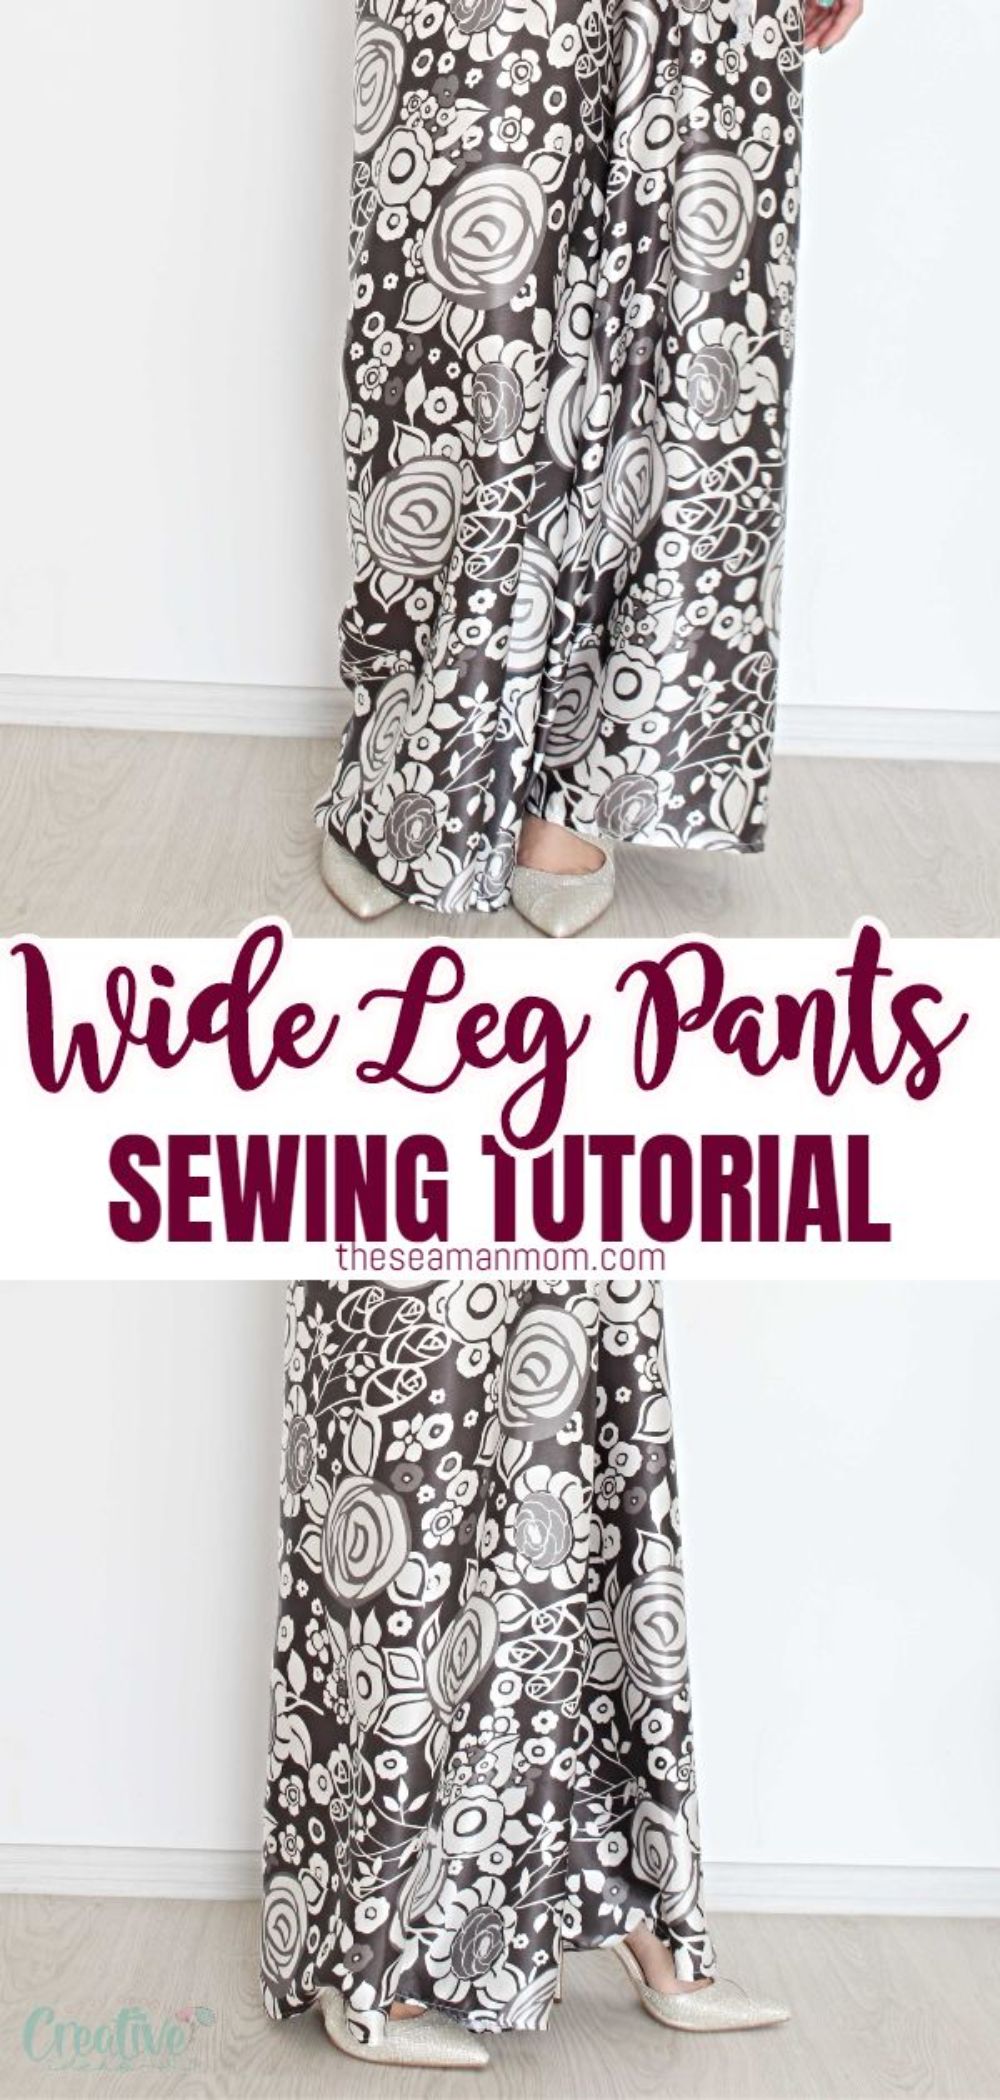 Wide leg pants are a great way to add some extra style and comfort into your wardrobe! But, they can be difficult to make if you don’t know what you’re doing. Don't know how to make wide leg pants? Luckily for you, I have created this tutorial with easy step-by-step instructions so that anyone can create their own wide leg pants pattern and sew a fabulous pair! via @petroneagu